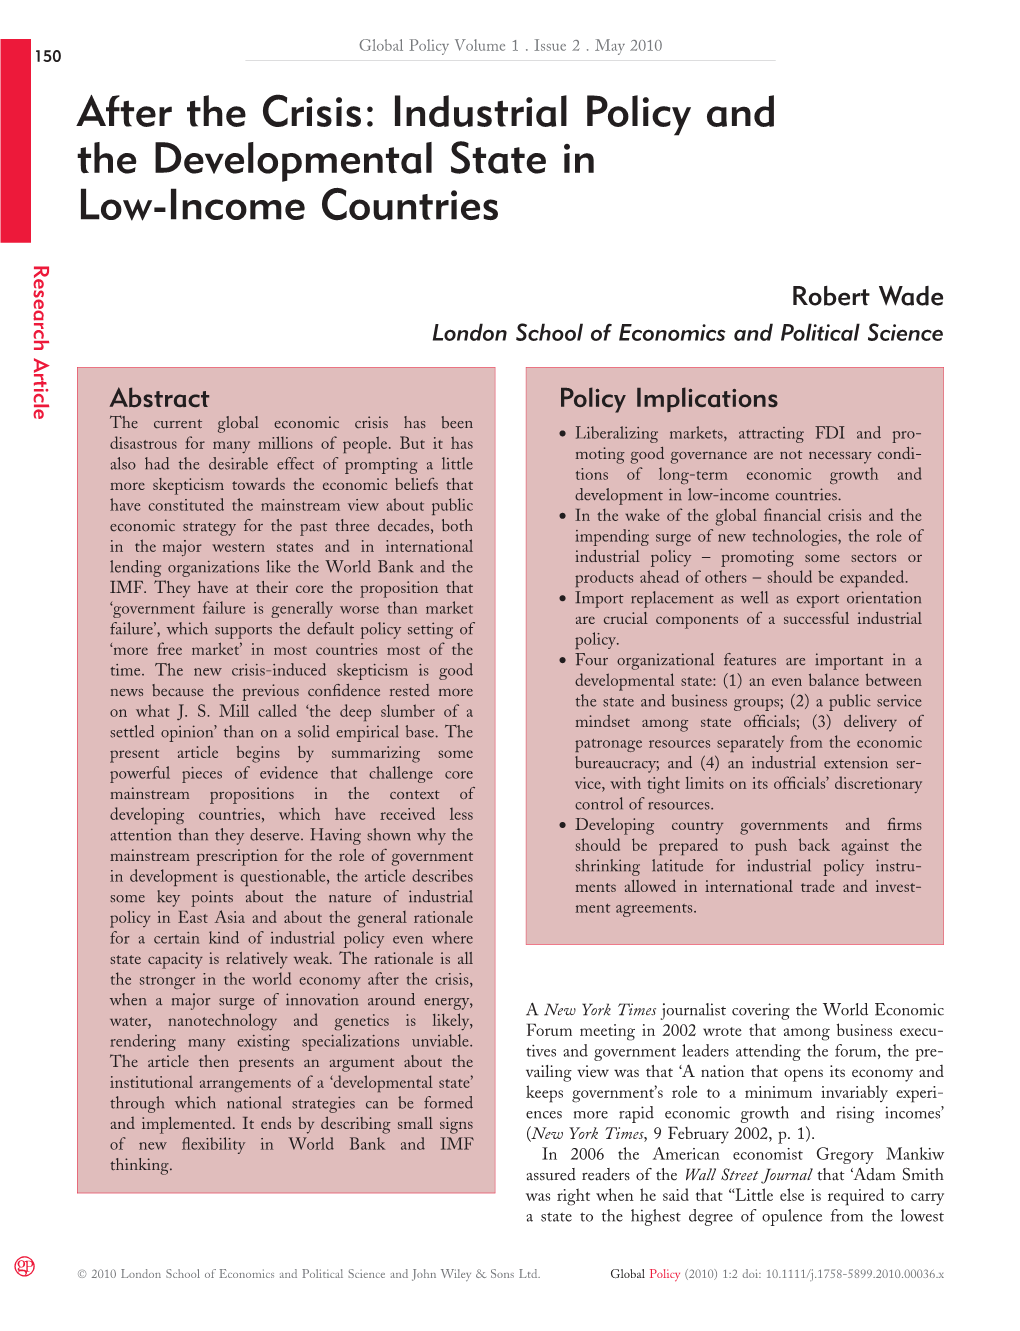 After the Crisis: Industrial Policy and the Developmental State in Low-Income Countrie